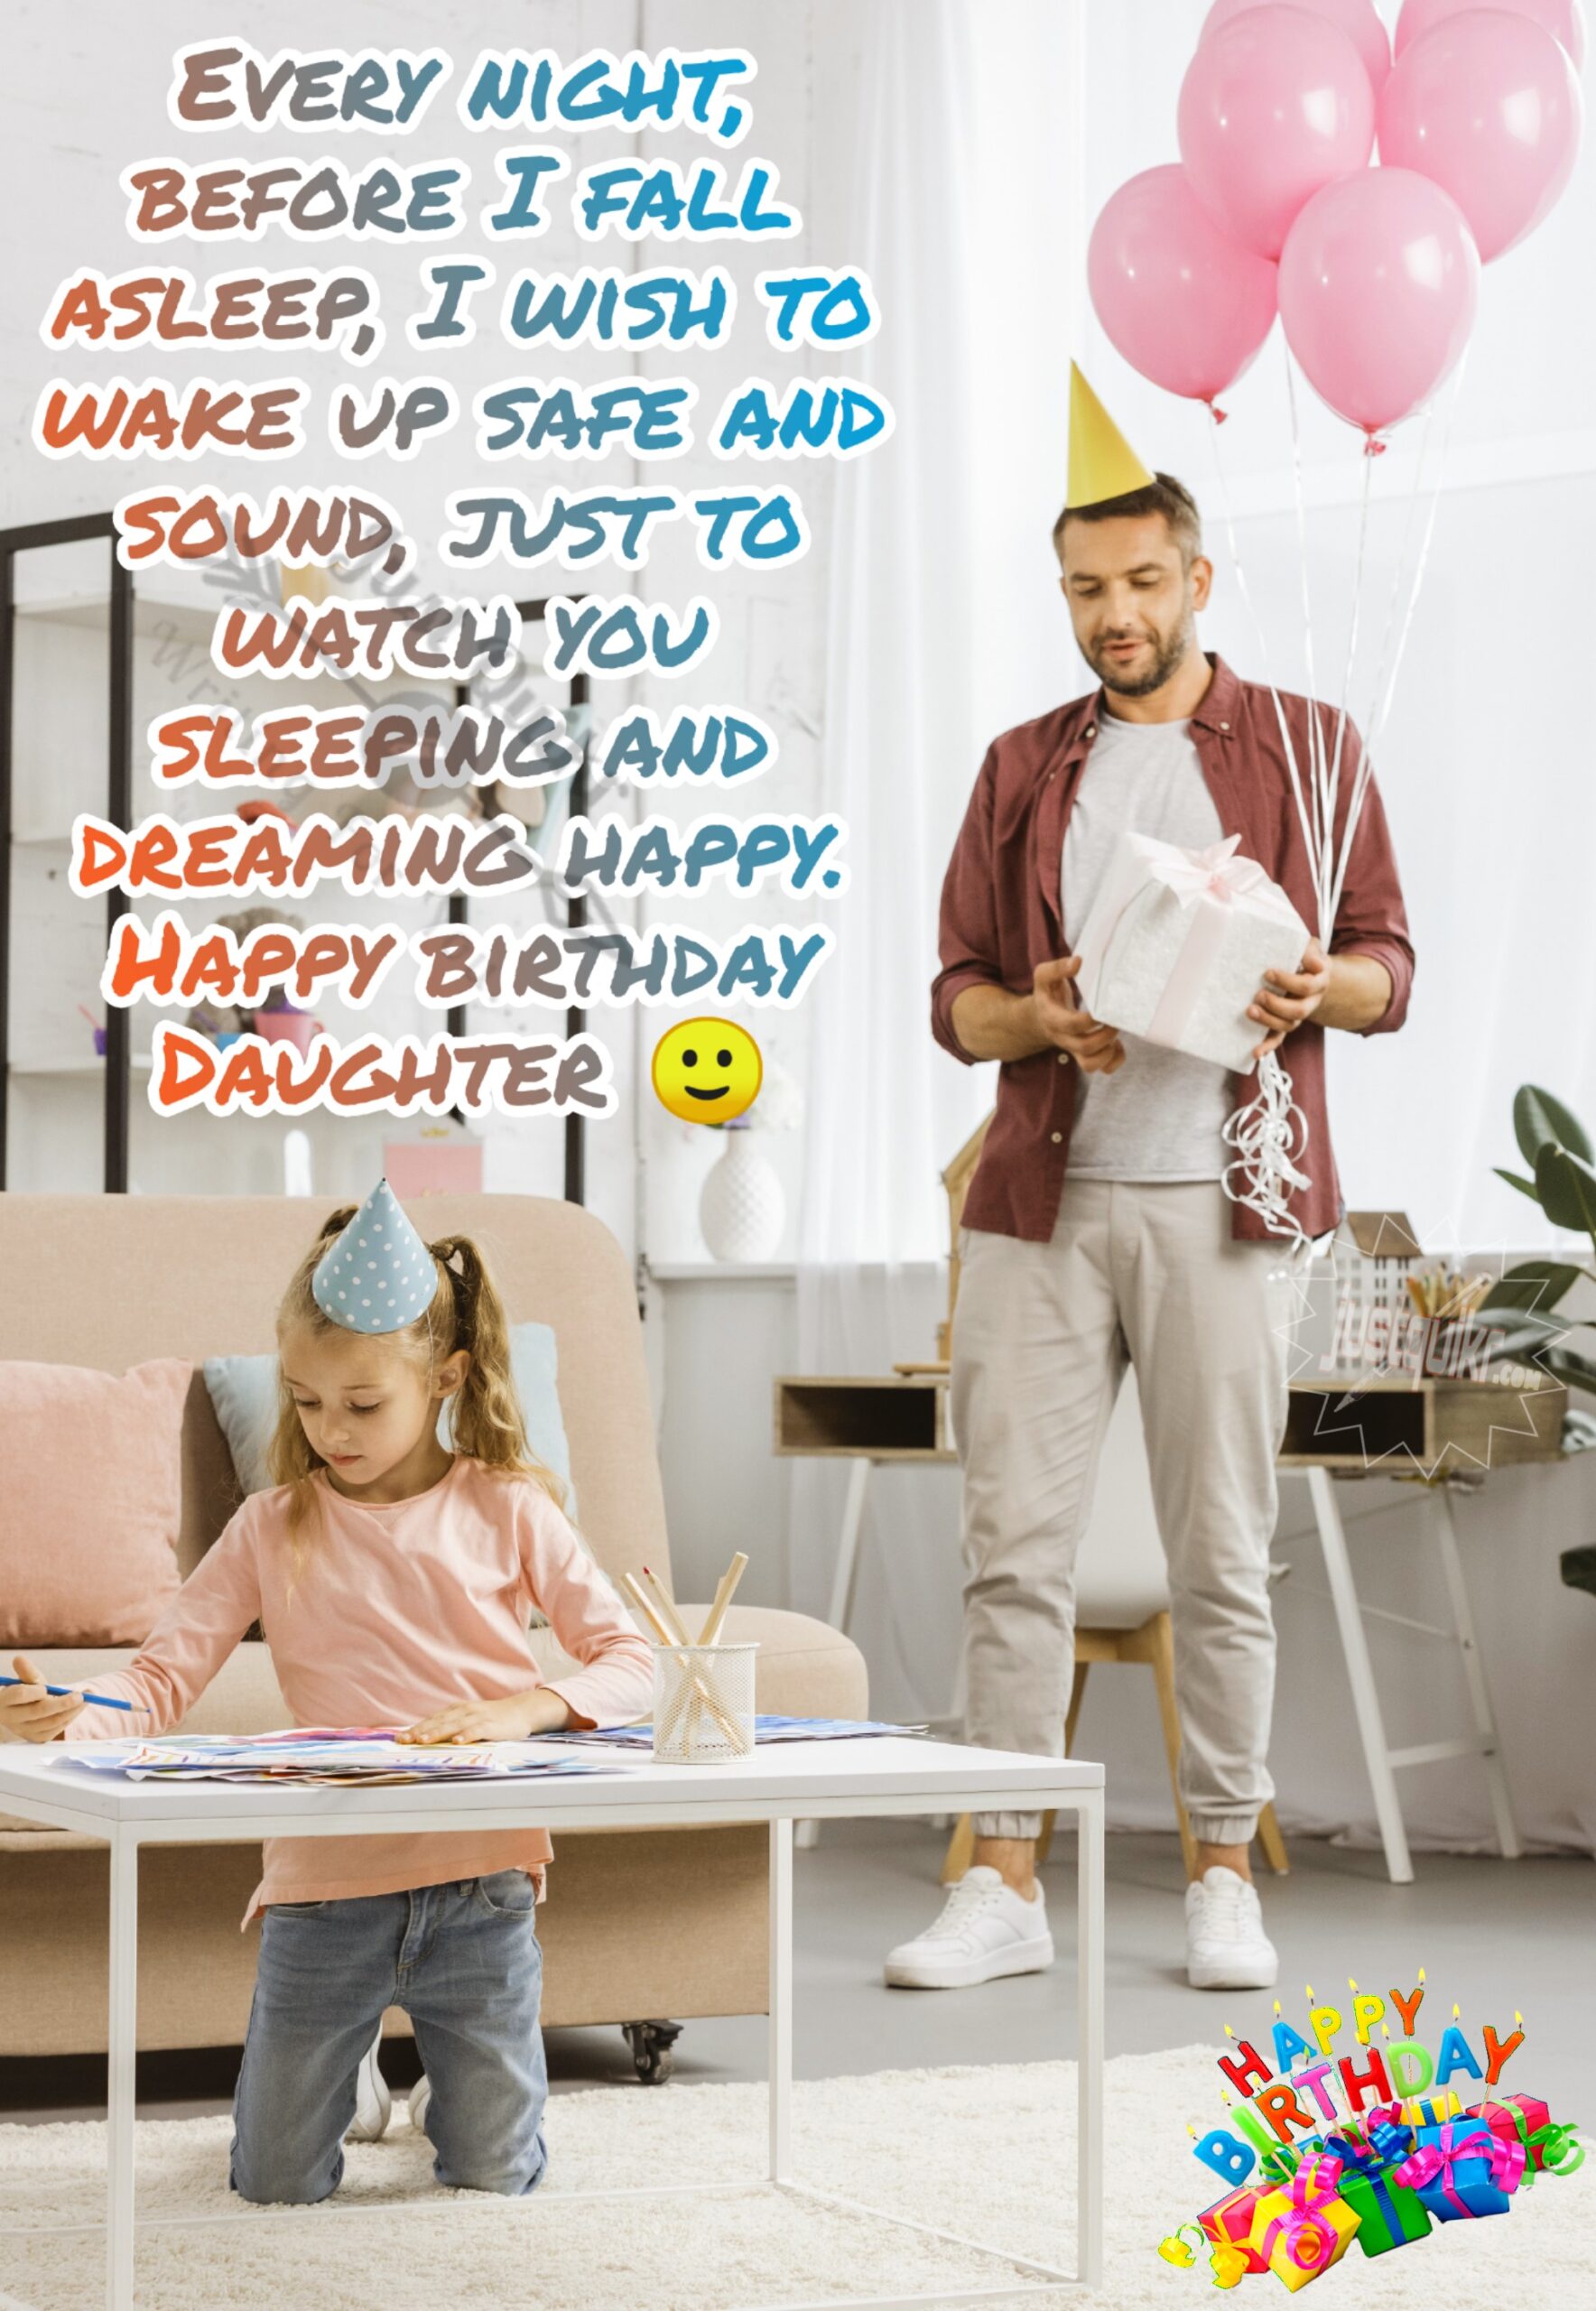 Creative Happy Birthday Wishes Thoughts Quotes Lines Messages in English for Daughter From Dad